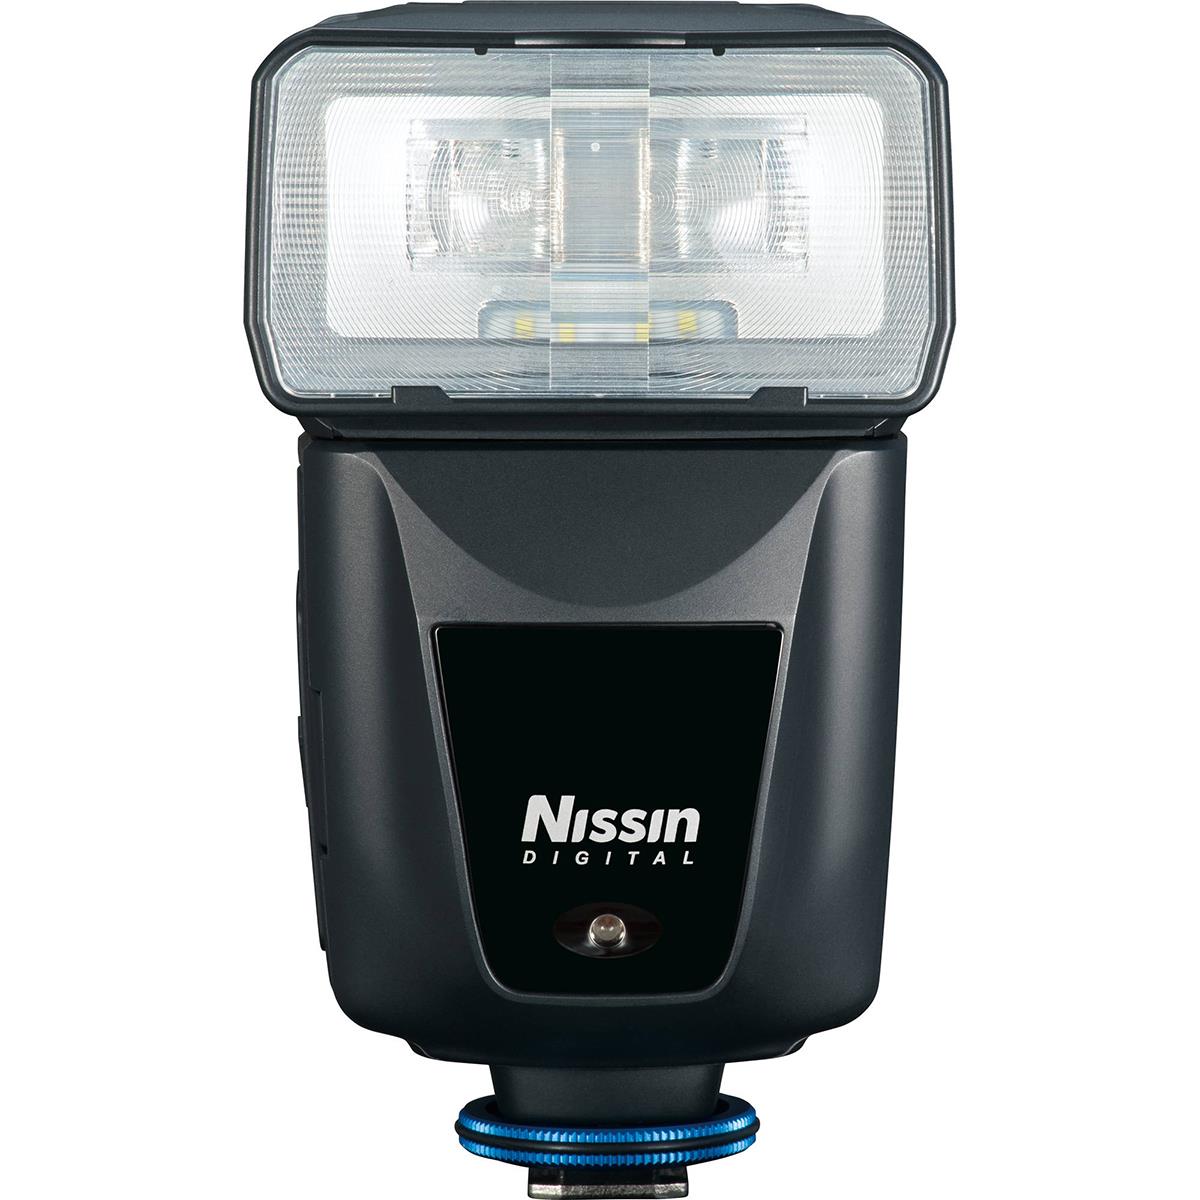 Image of Nissin MG80 Pro Flash for Sony Cameras